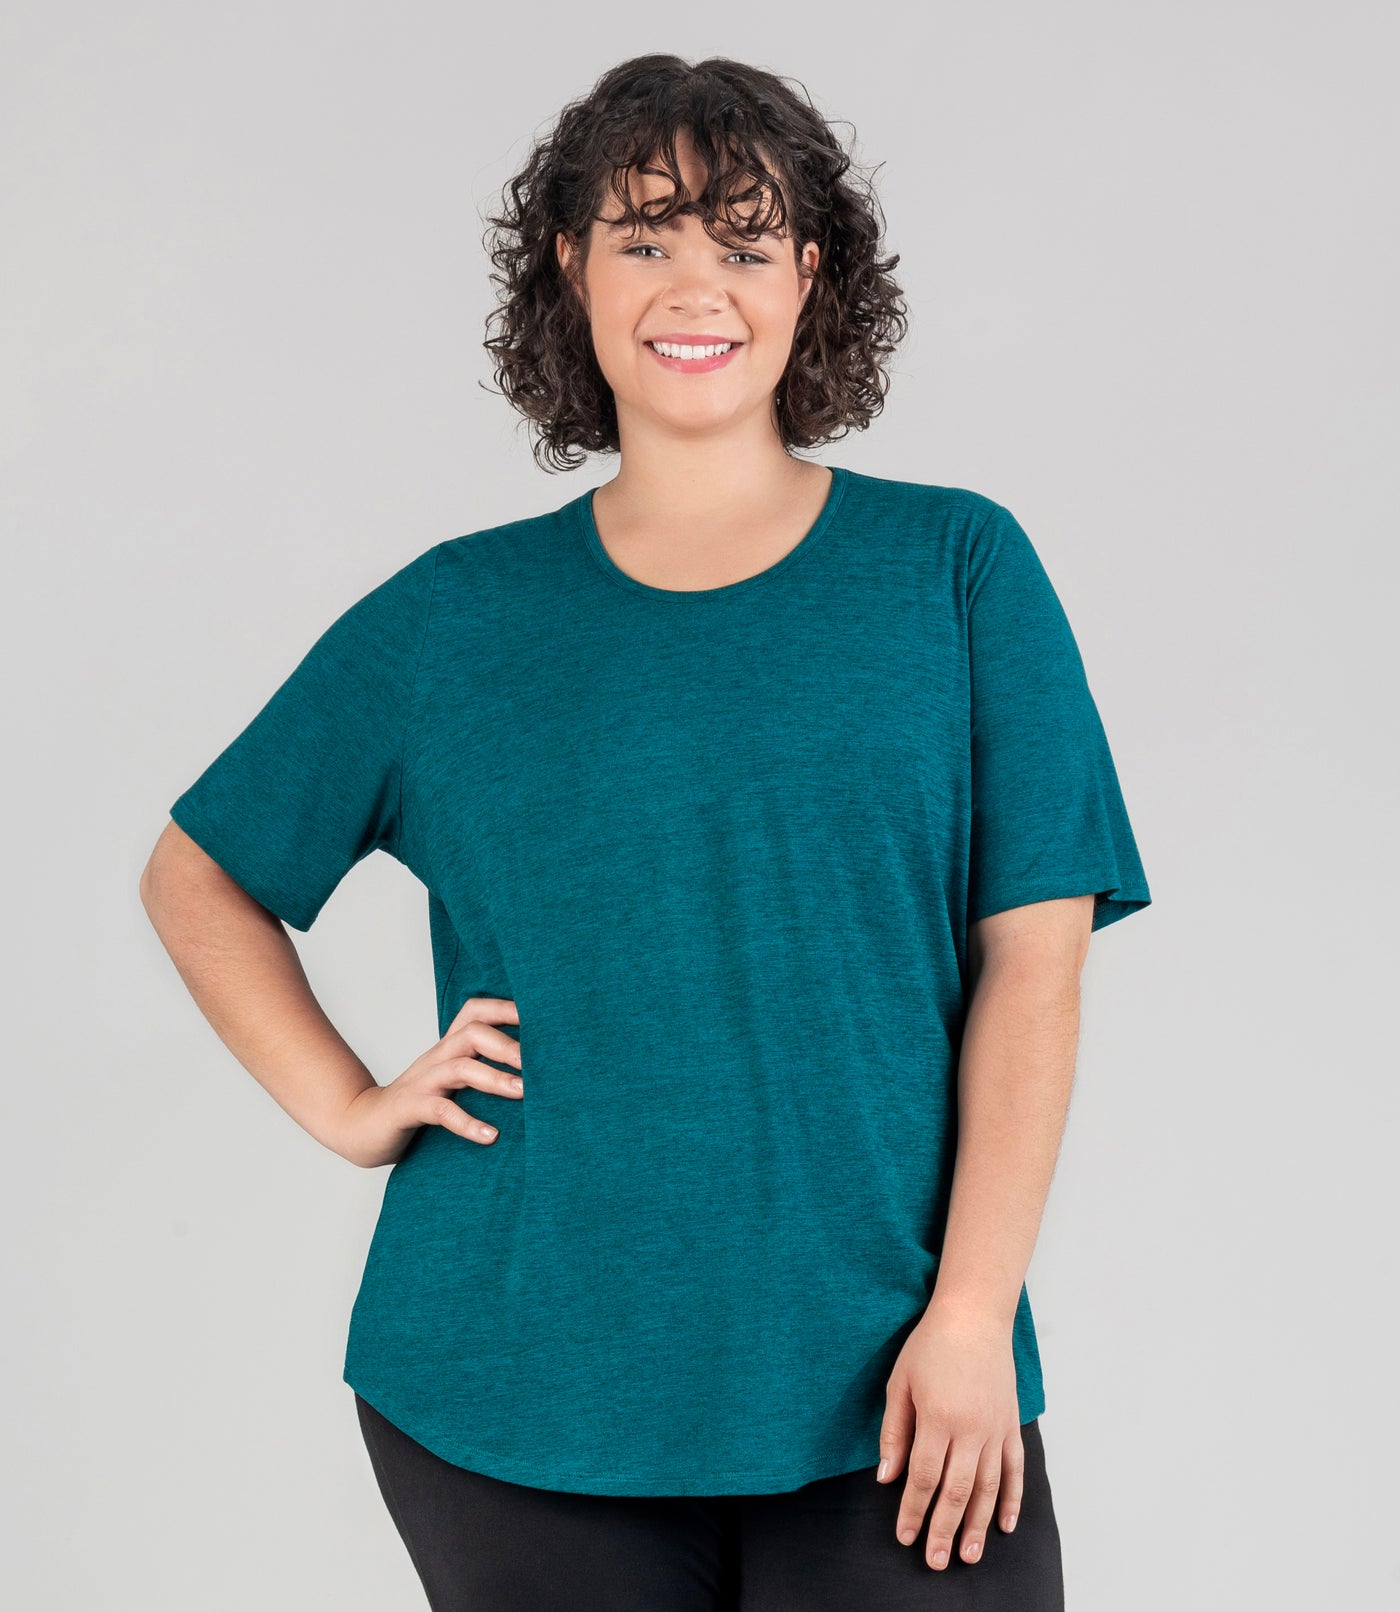 JunoActive mode, facing front, l wearing soft supreme scoop neck short sleeve top in color heather dark teal. Her right arm is bent and hand on hip and left arm is by her side.. Length of sleeve is about 1.5 inches above elbow.